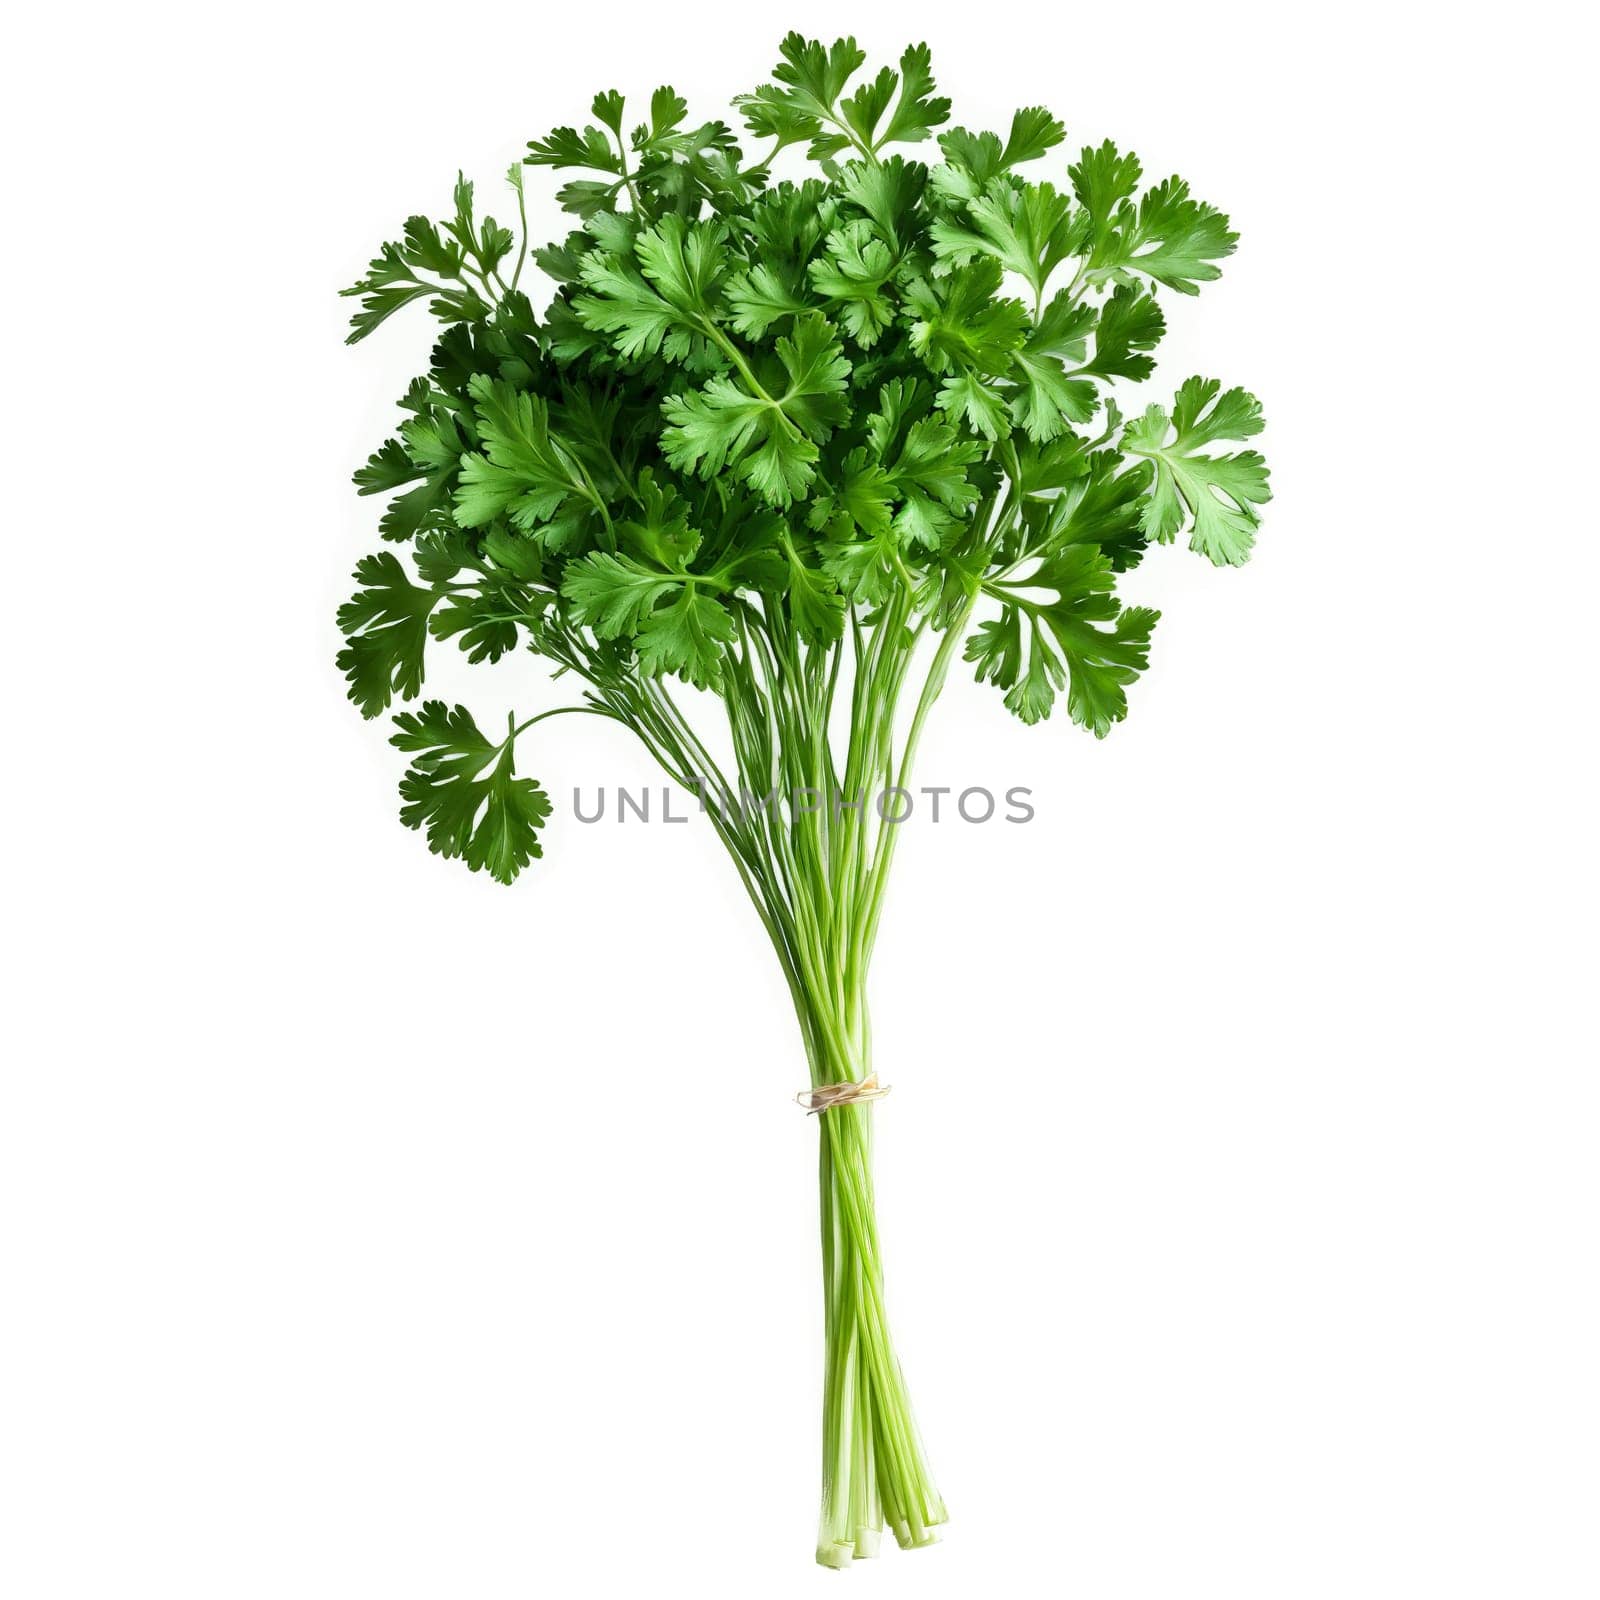 Parsley with curly leaves and stems in scattered dynamic arrangement Food and culinary concept by panophotograph